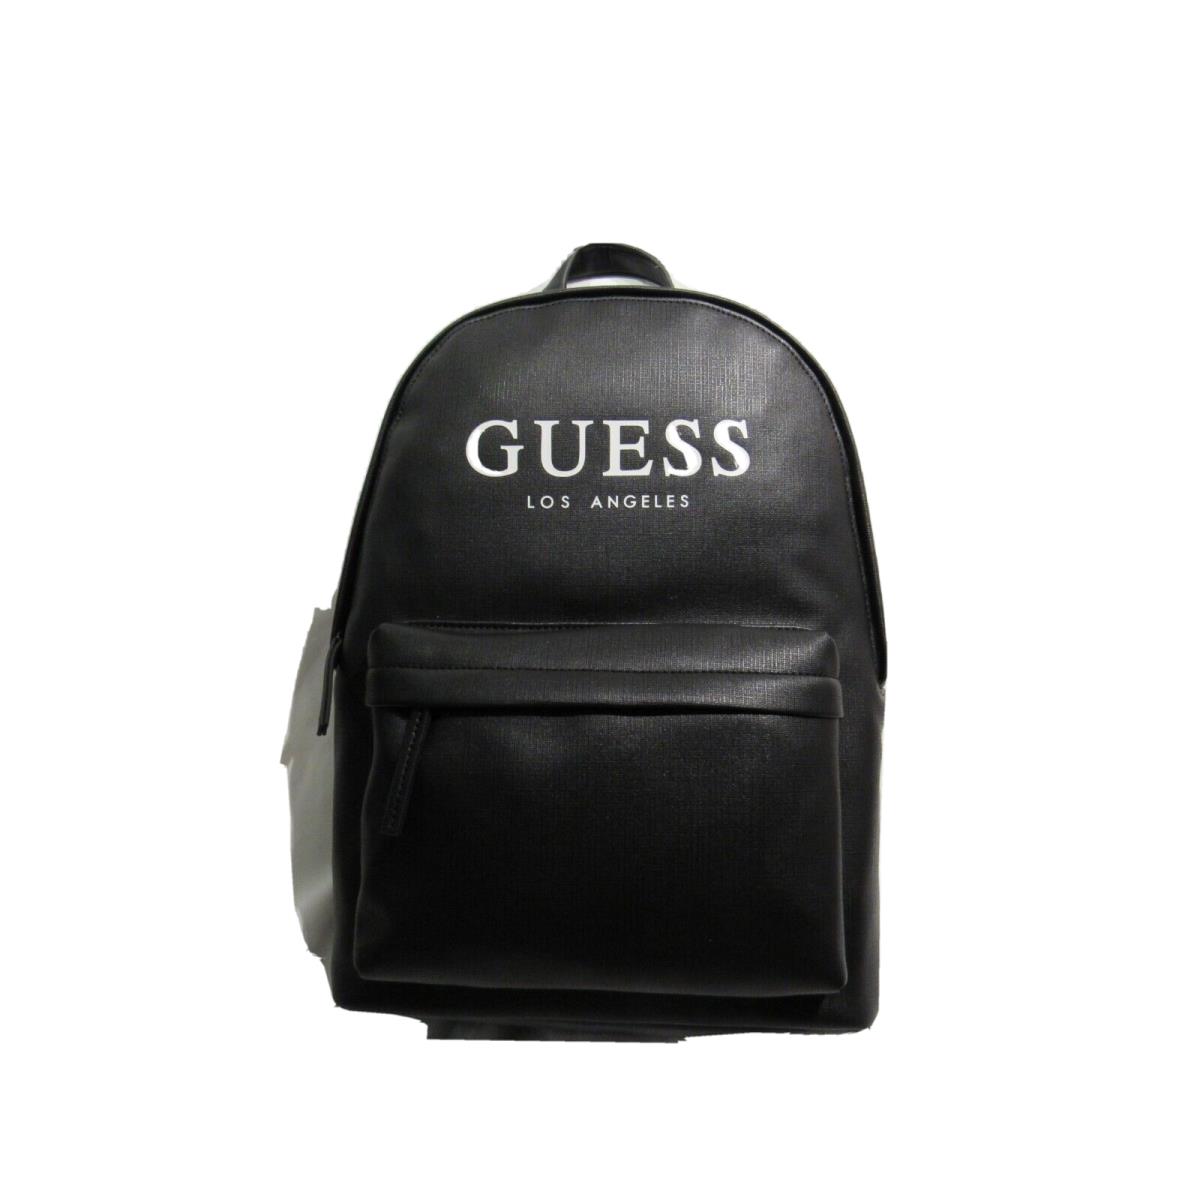 Guess Backpack Outfitter in Black Free US Shipping